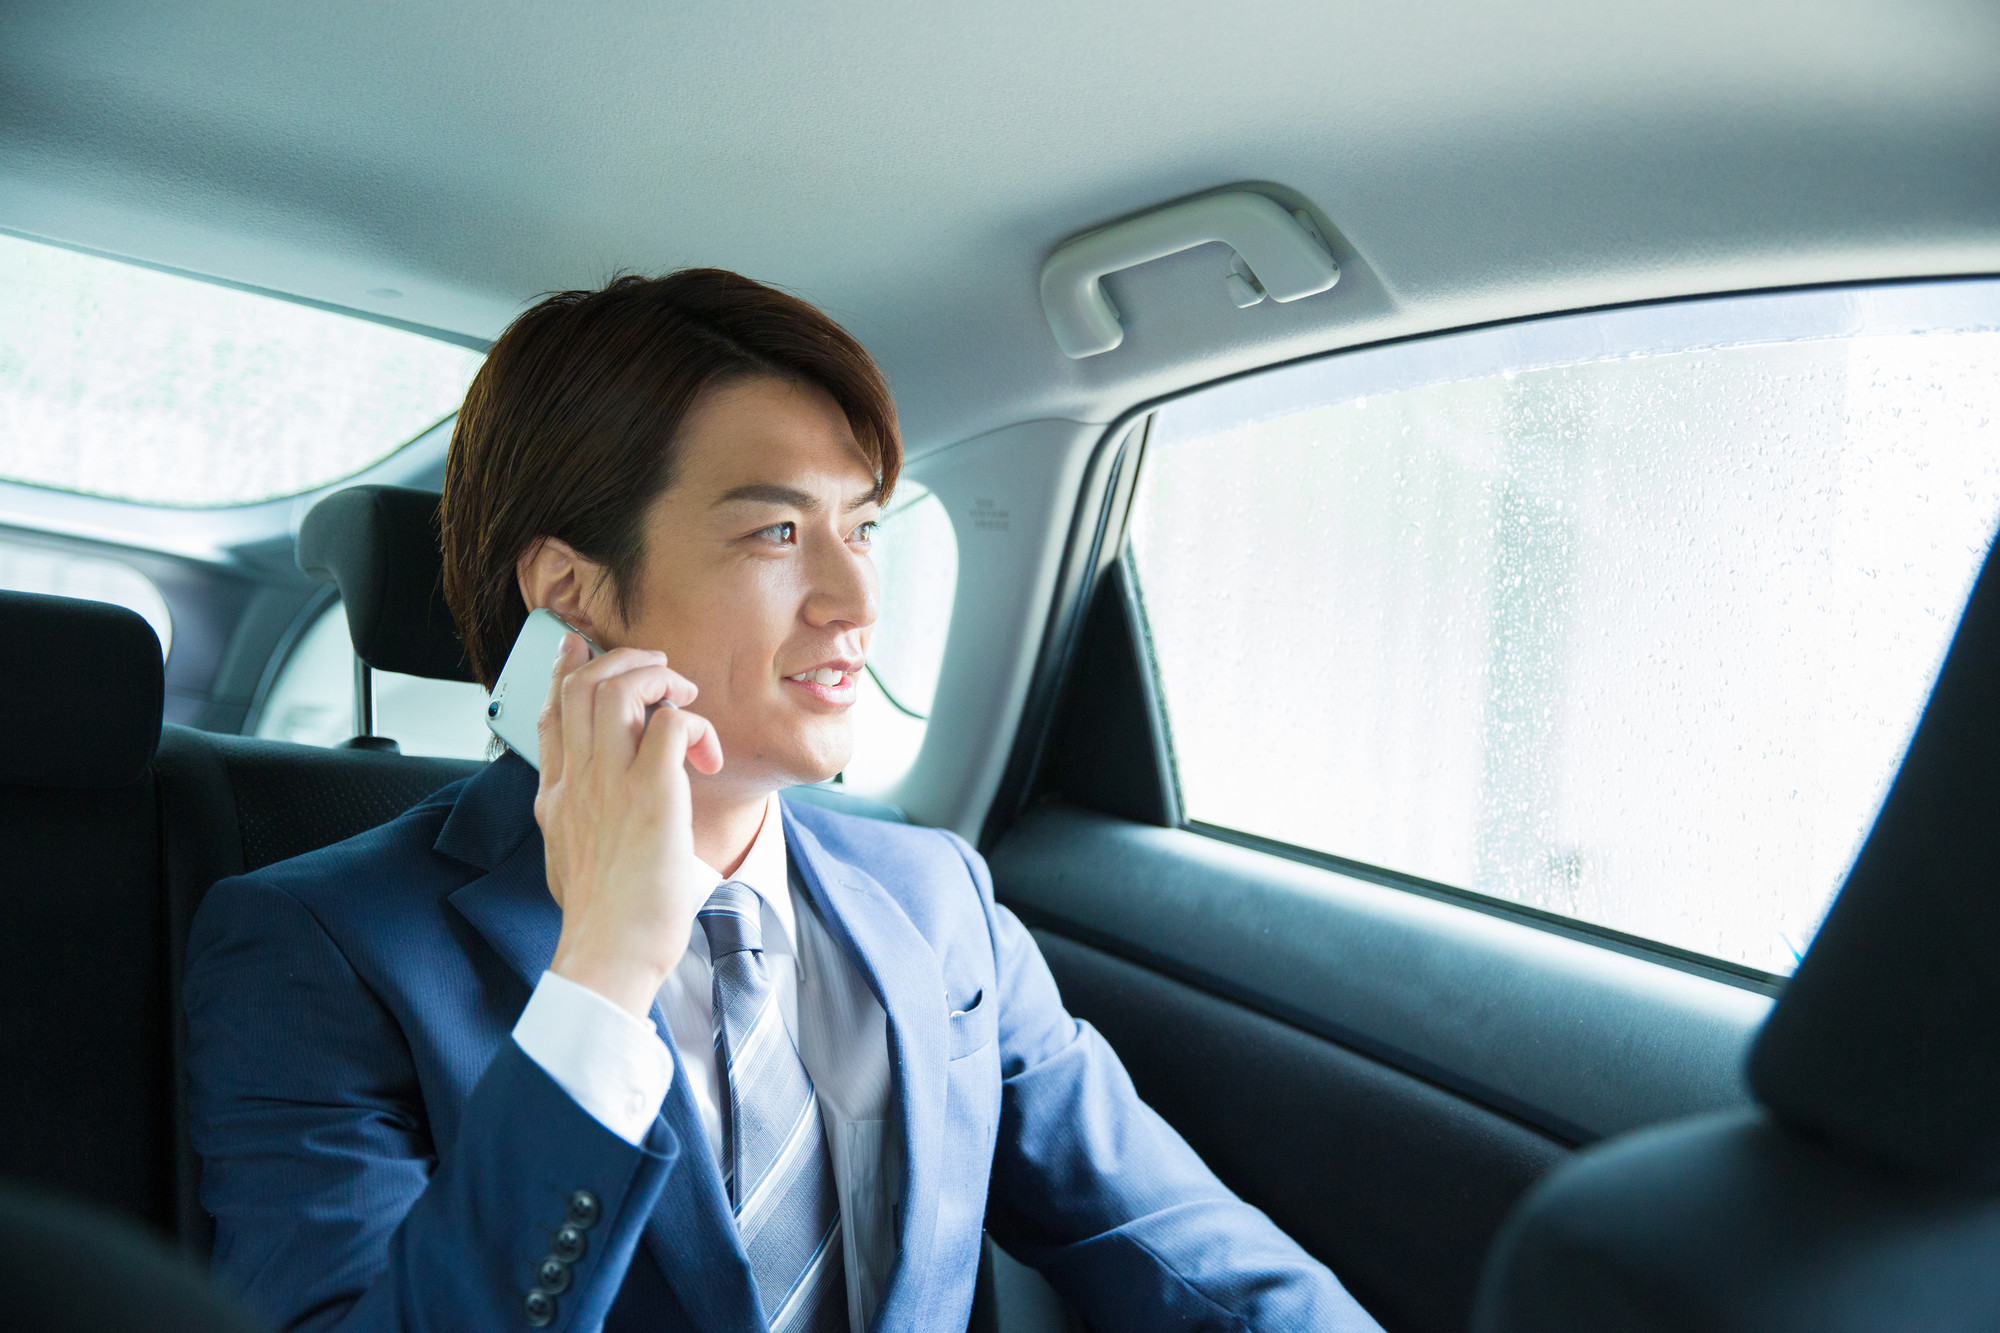 ■I want to hire an exclusive officer driver! Let's know the driver's price and what kind of person 